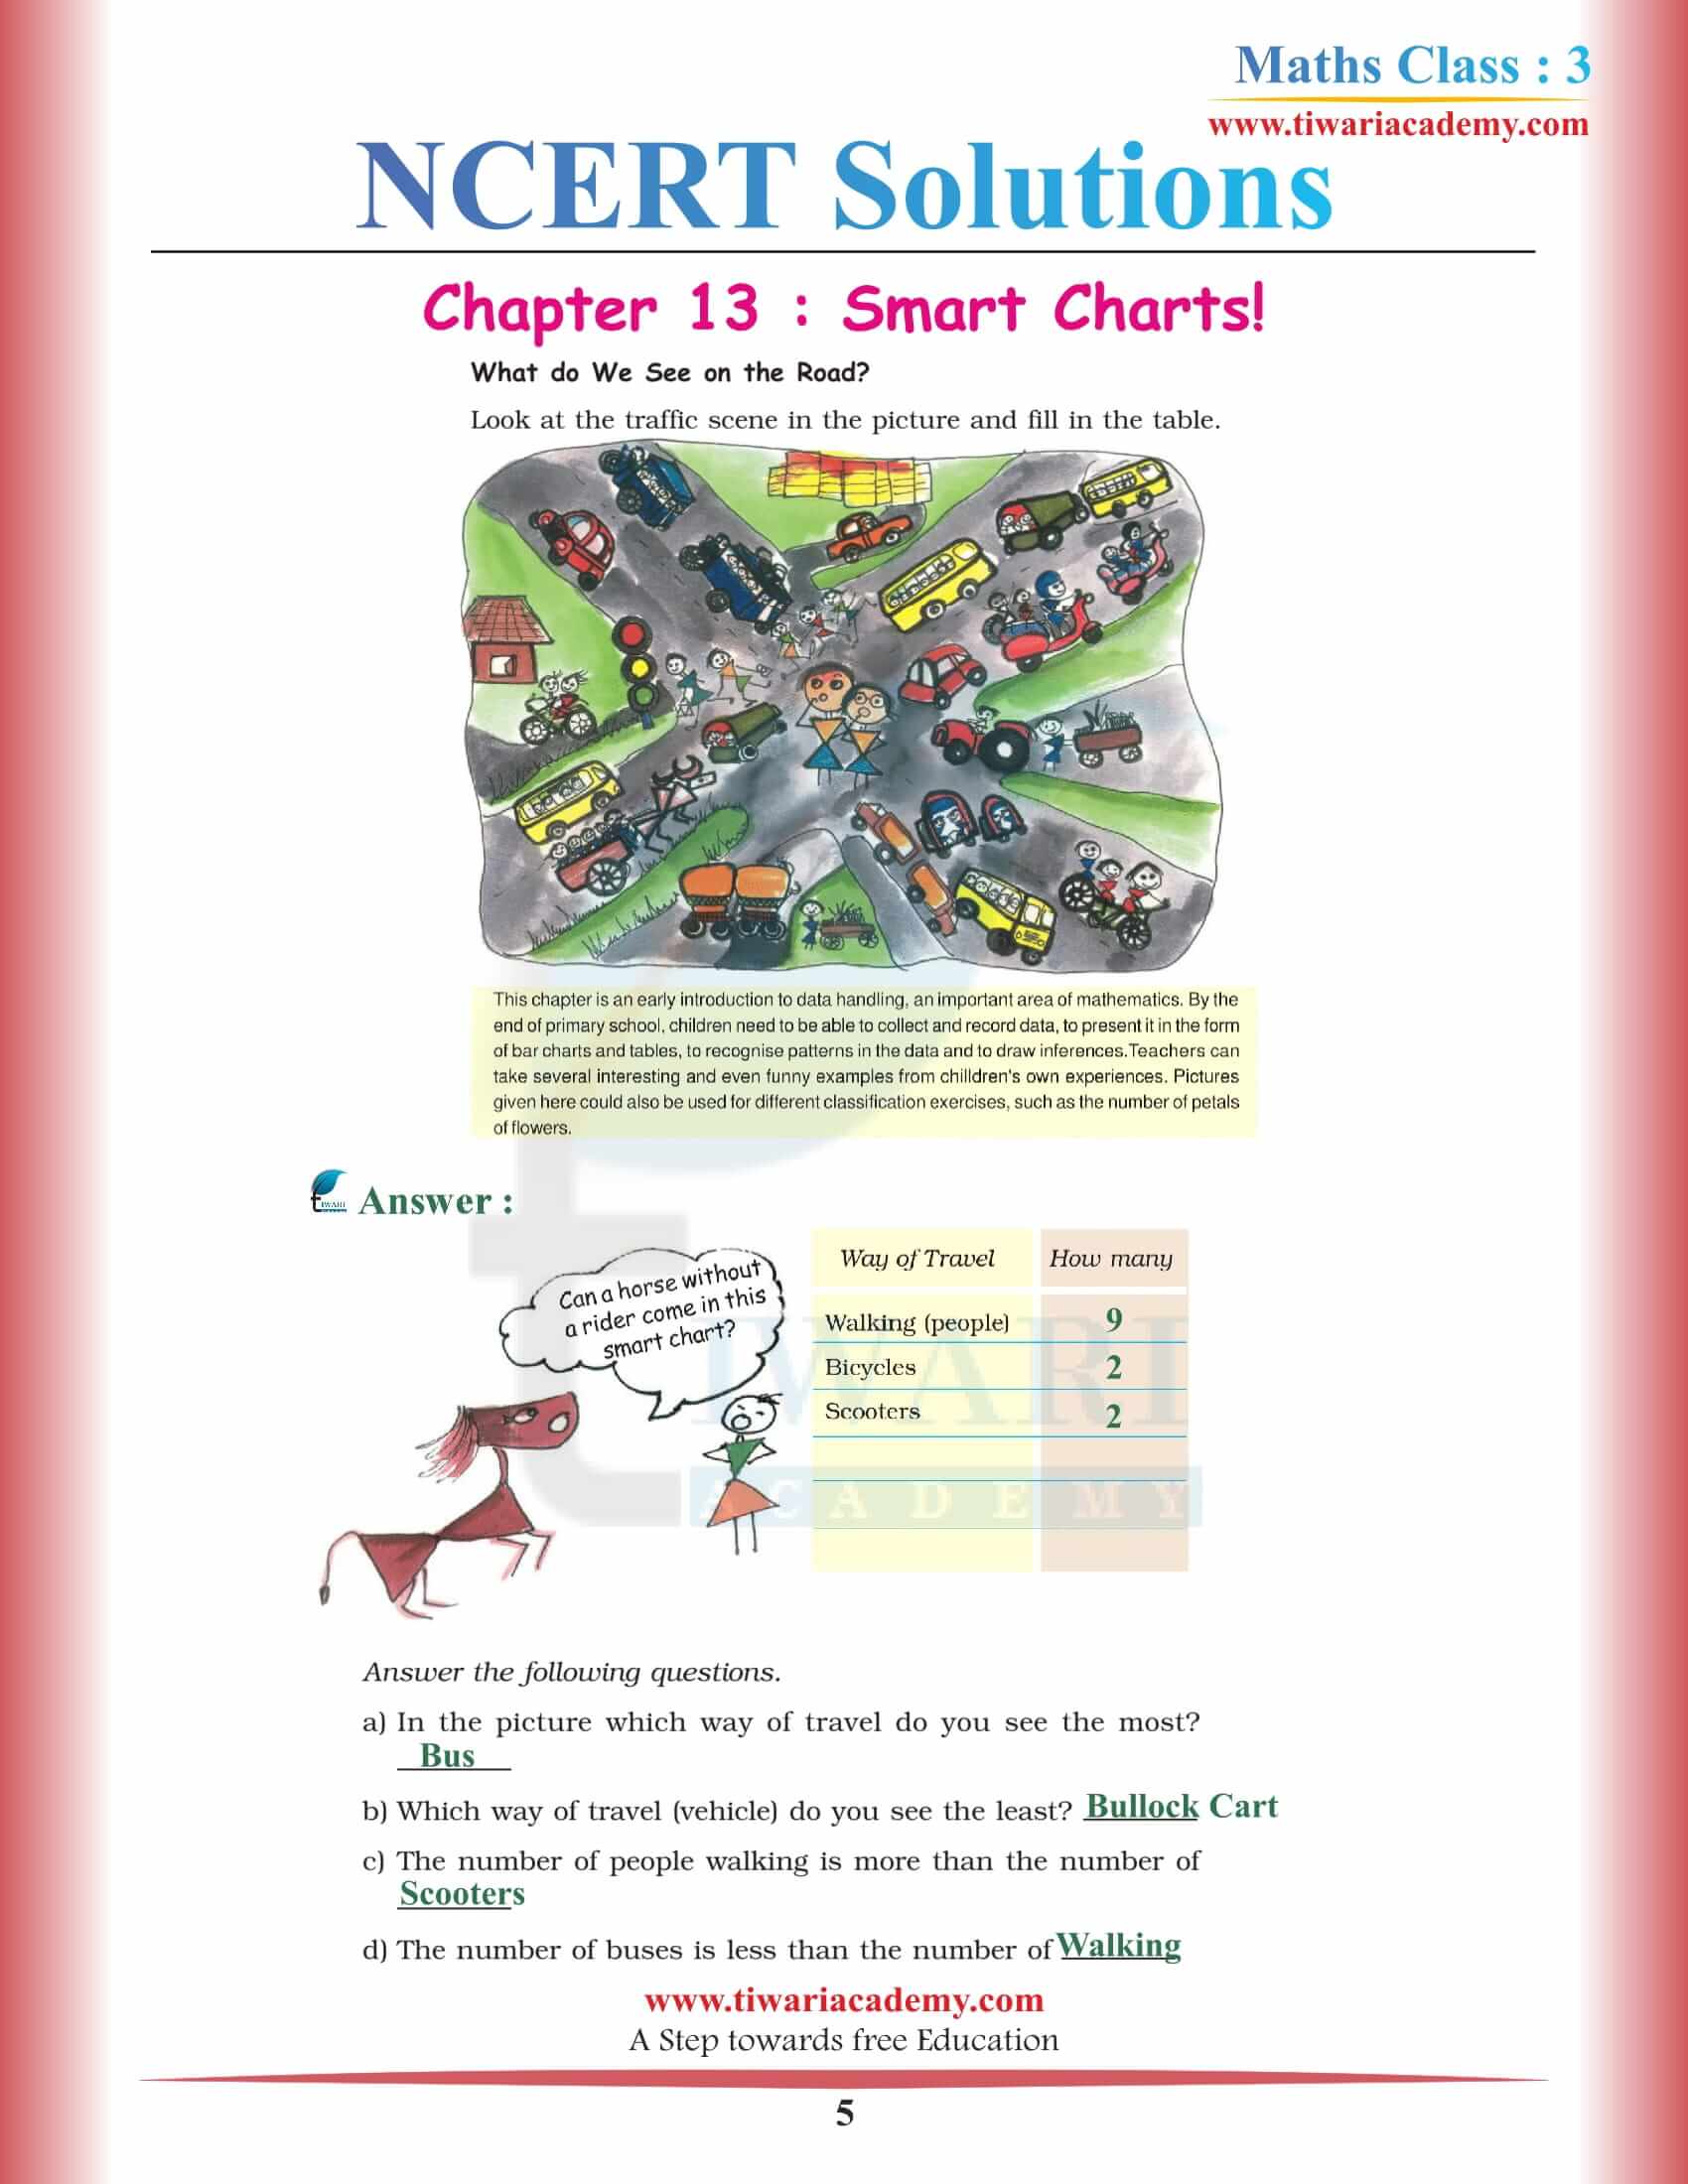 NCERT Solutions for Class 3 Maths Chapter 13 in PDF Format